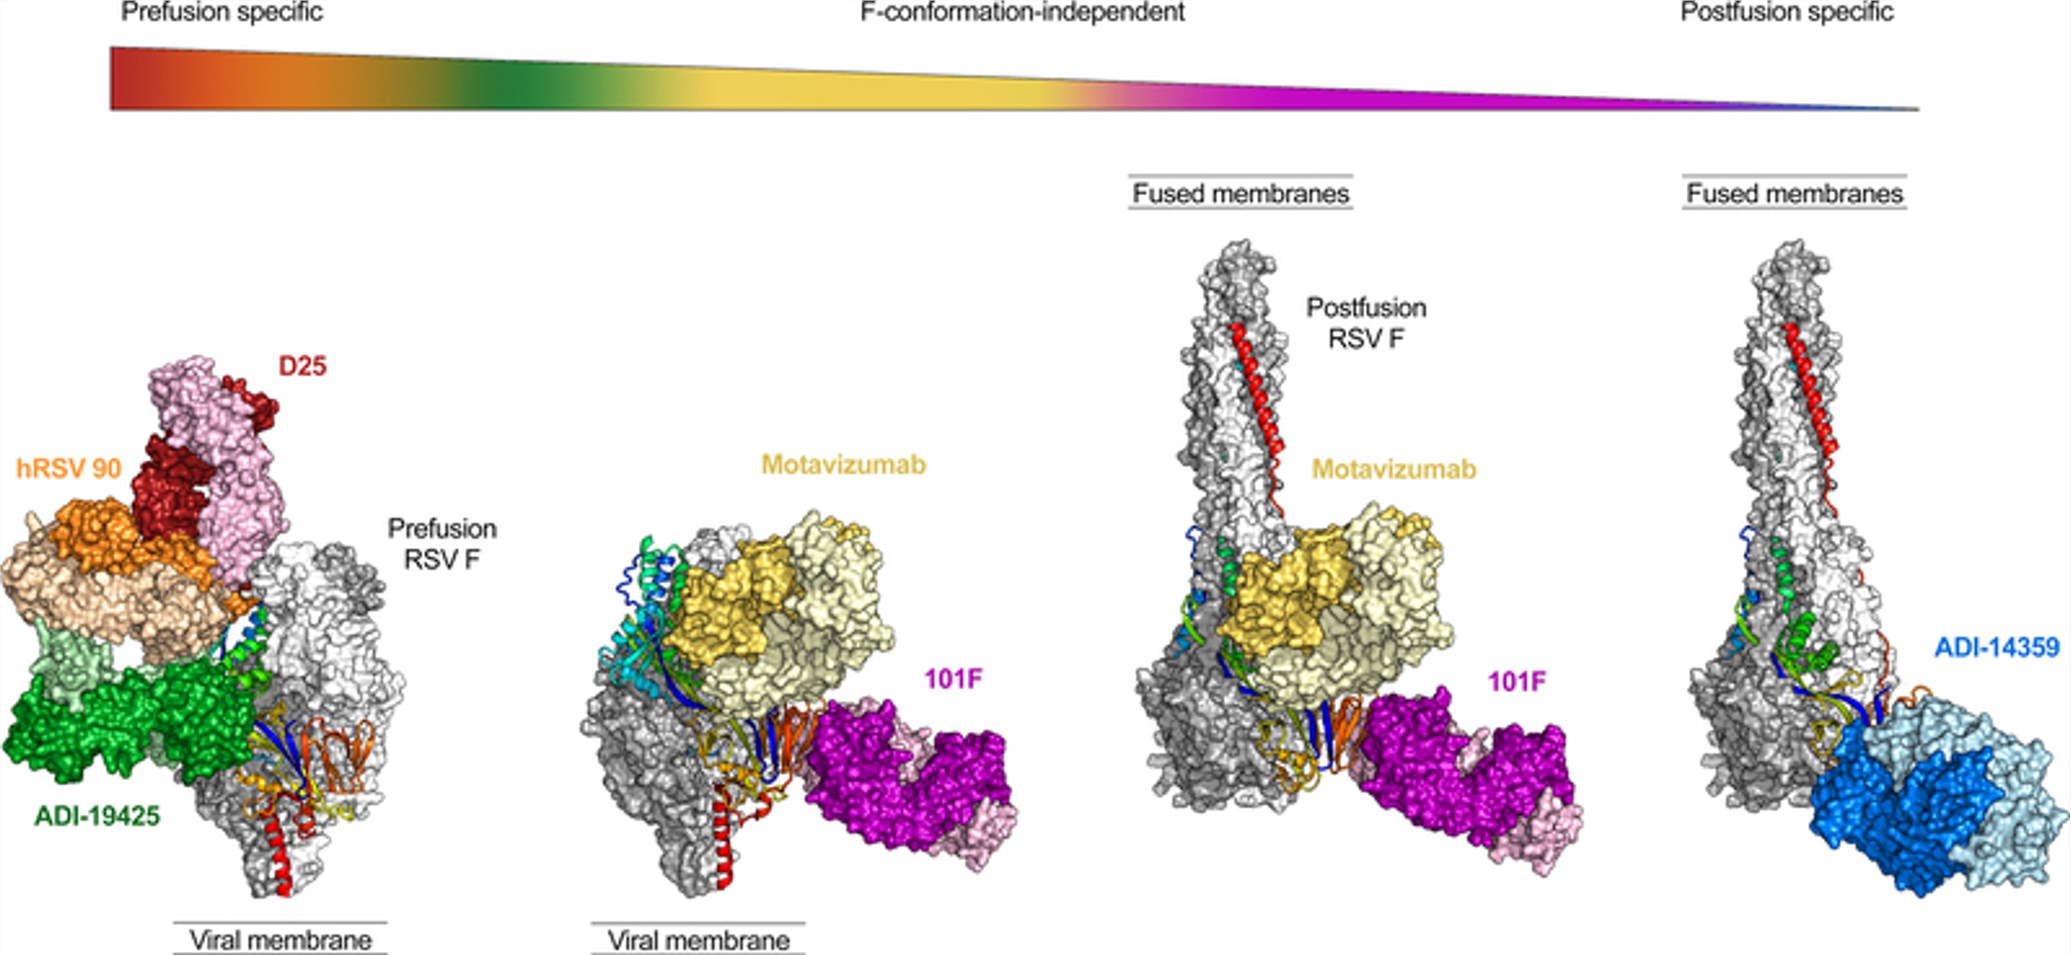 Epitopes present on two major conformations of the RSV F glycoprotein.